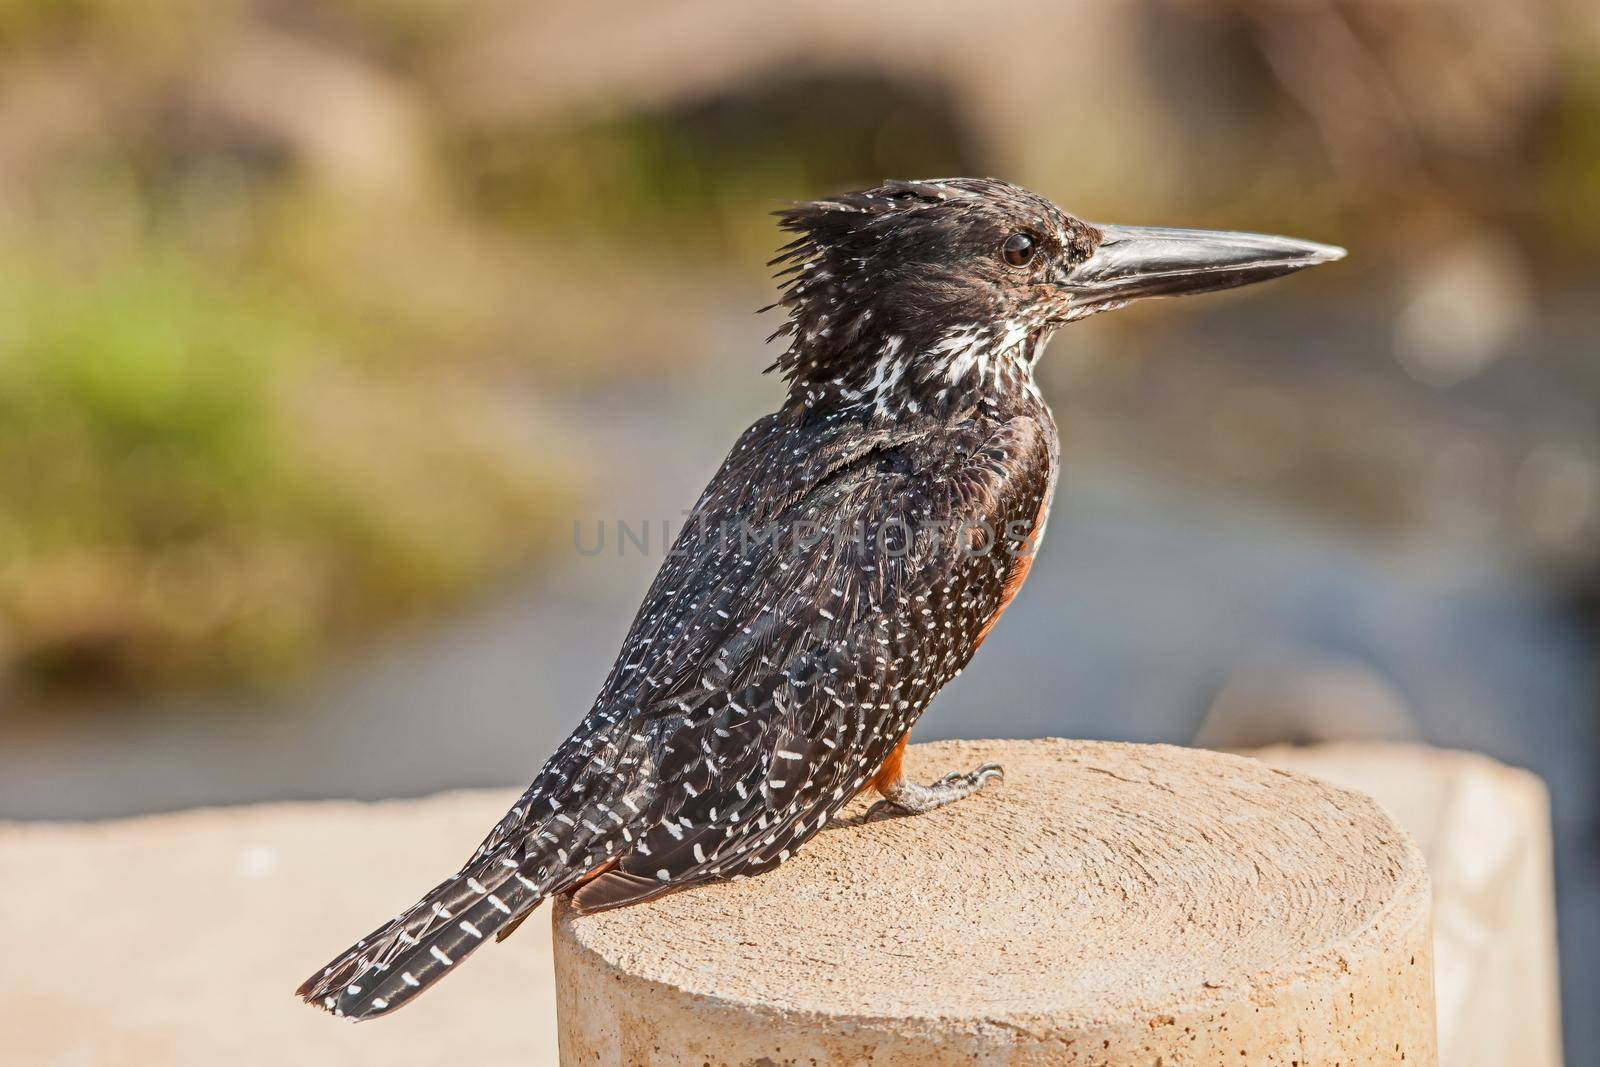 A Giant Kingfisher (Megeceryle maximus) perched on a low bridge in Kruger National Park. South Africa